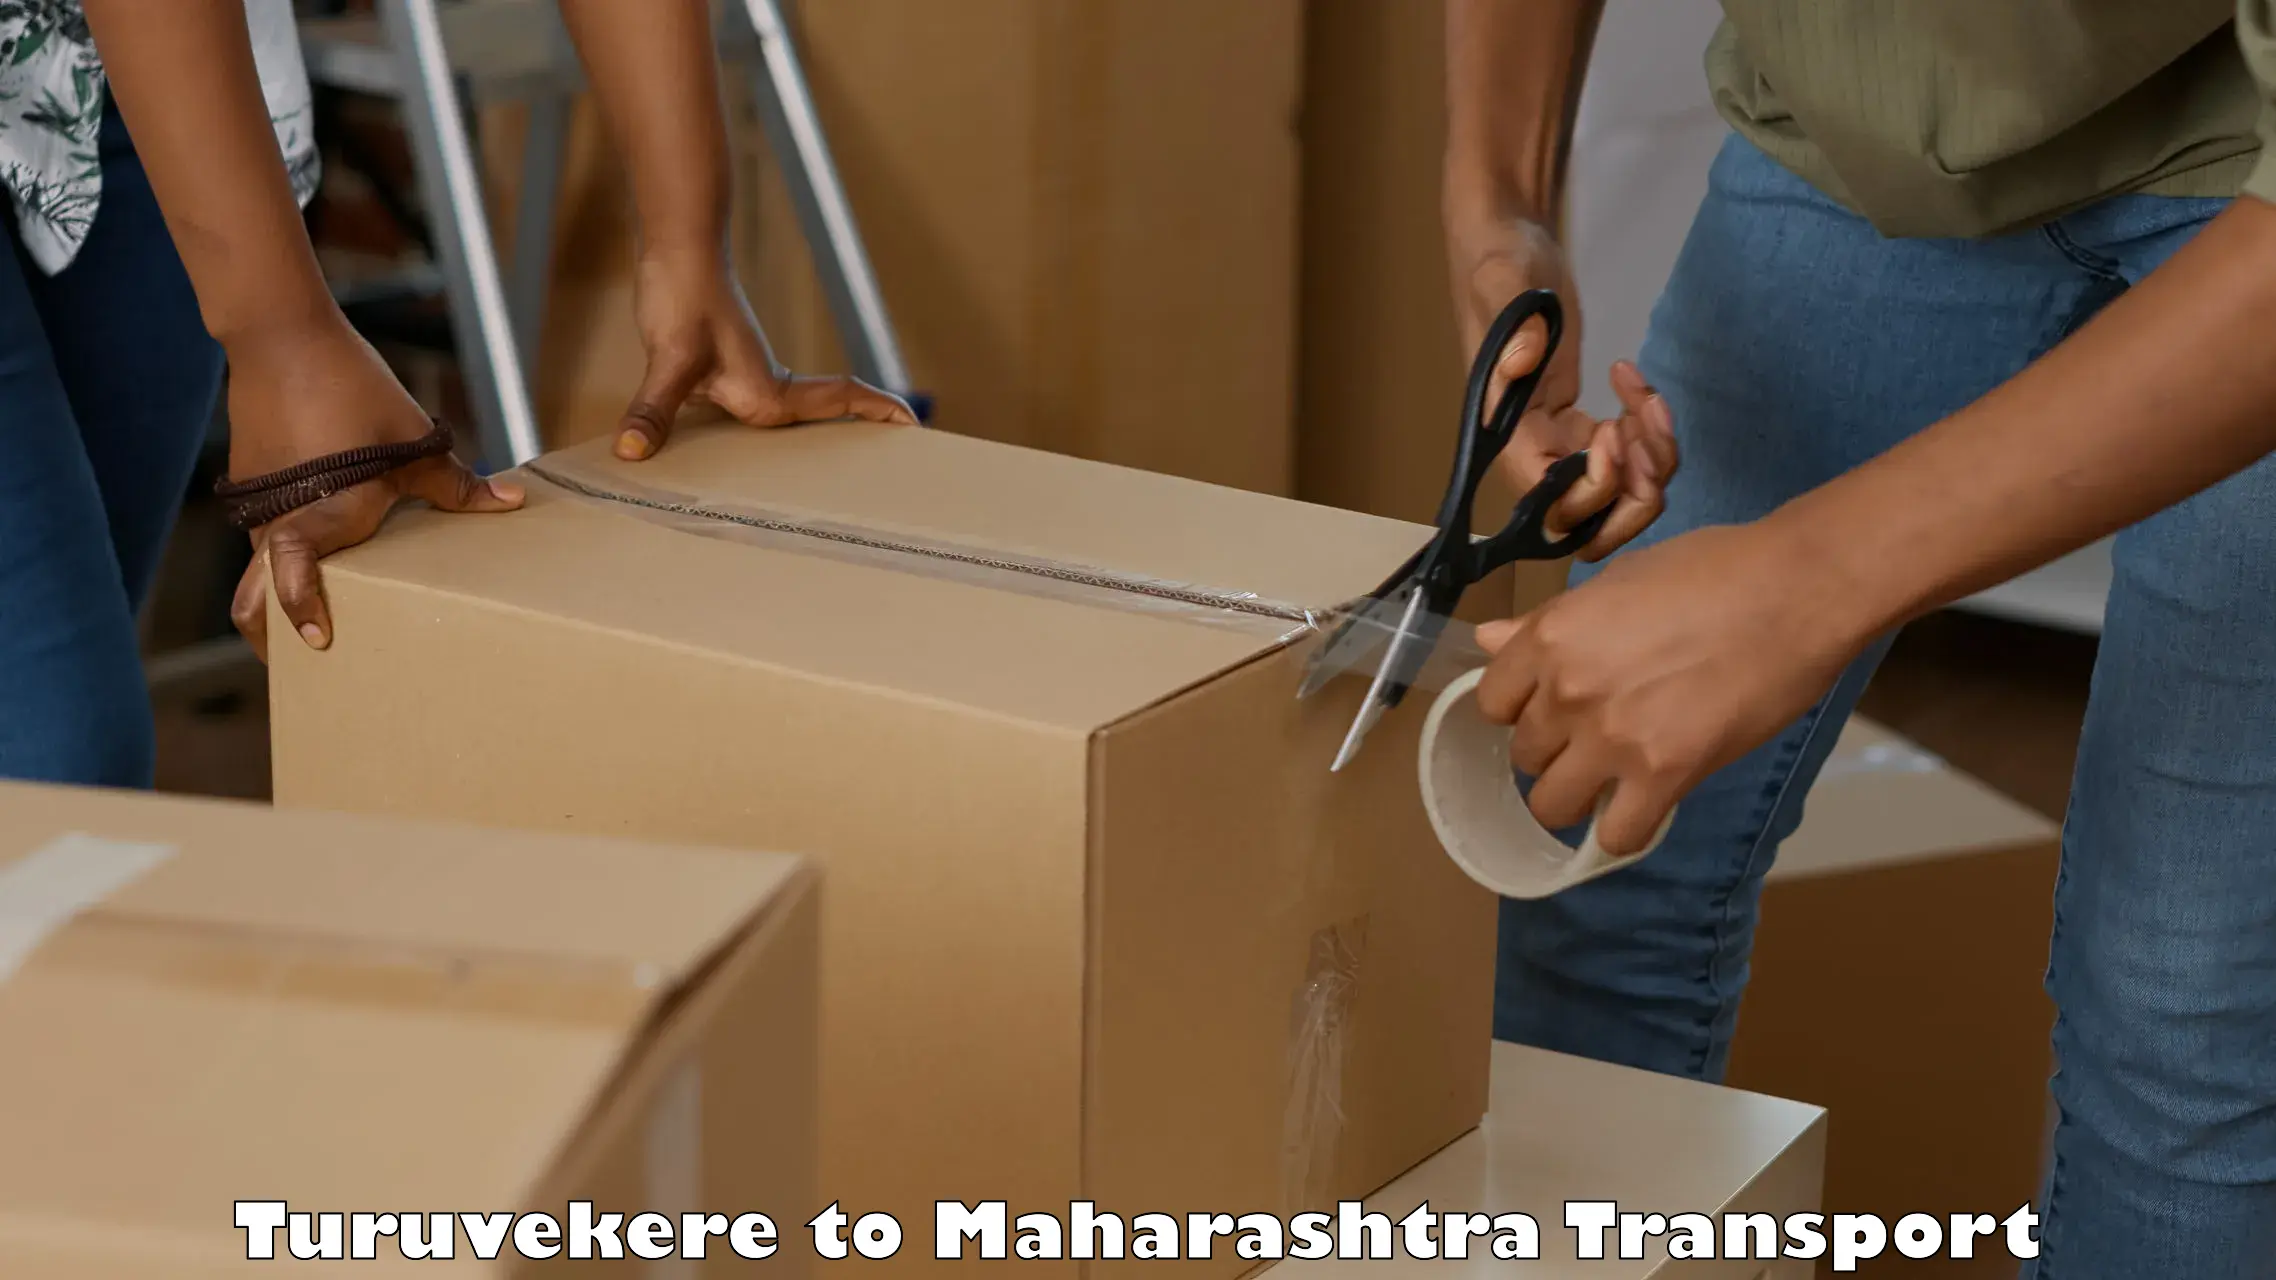 Part load transport service in India Turuvekere to Mumbai Port